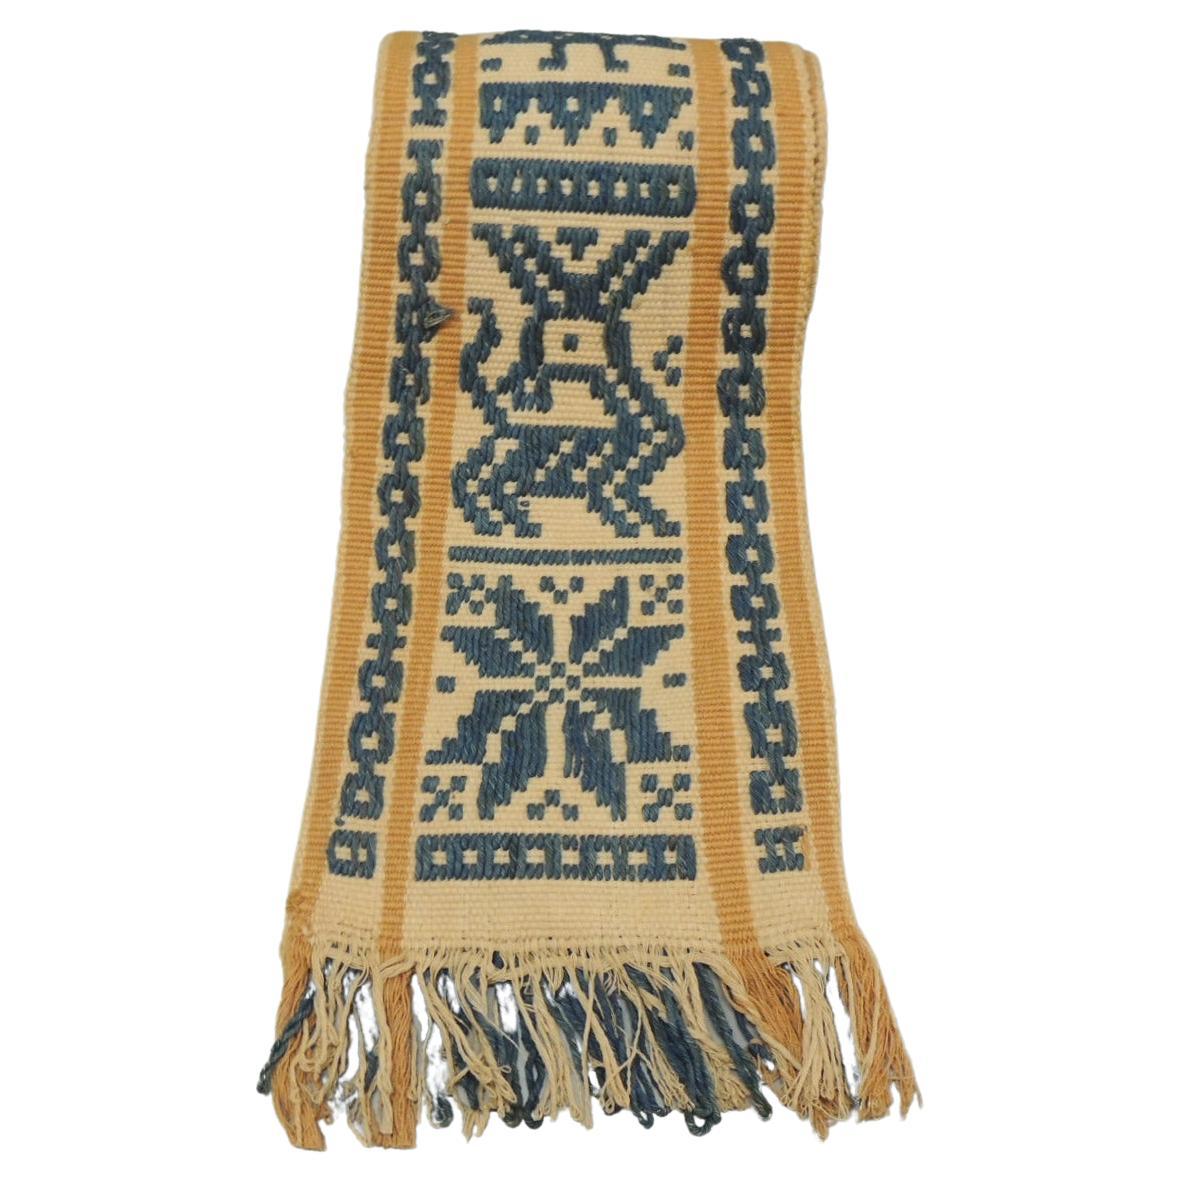 Antique Tribal Yellow and Blue Woven Turkish Sash